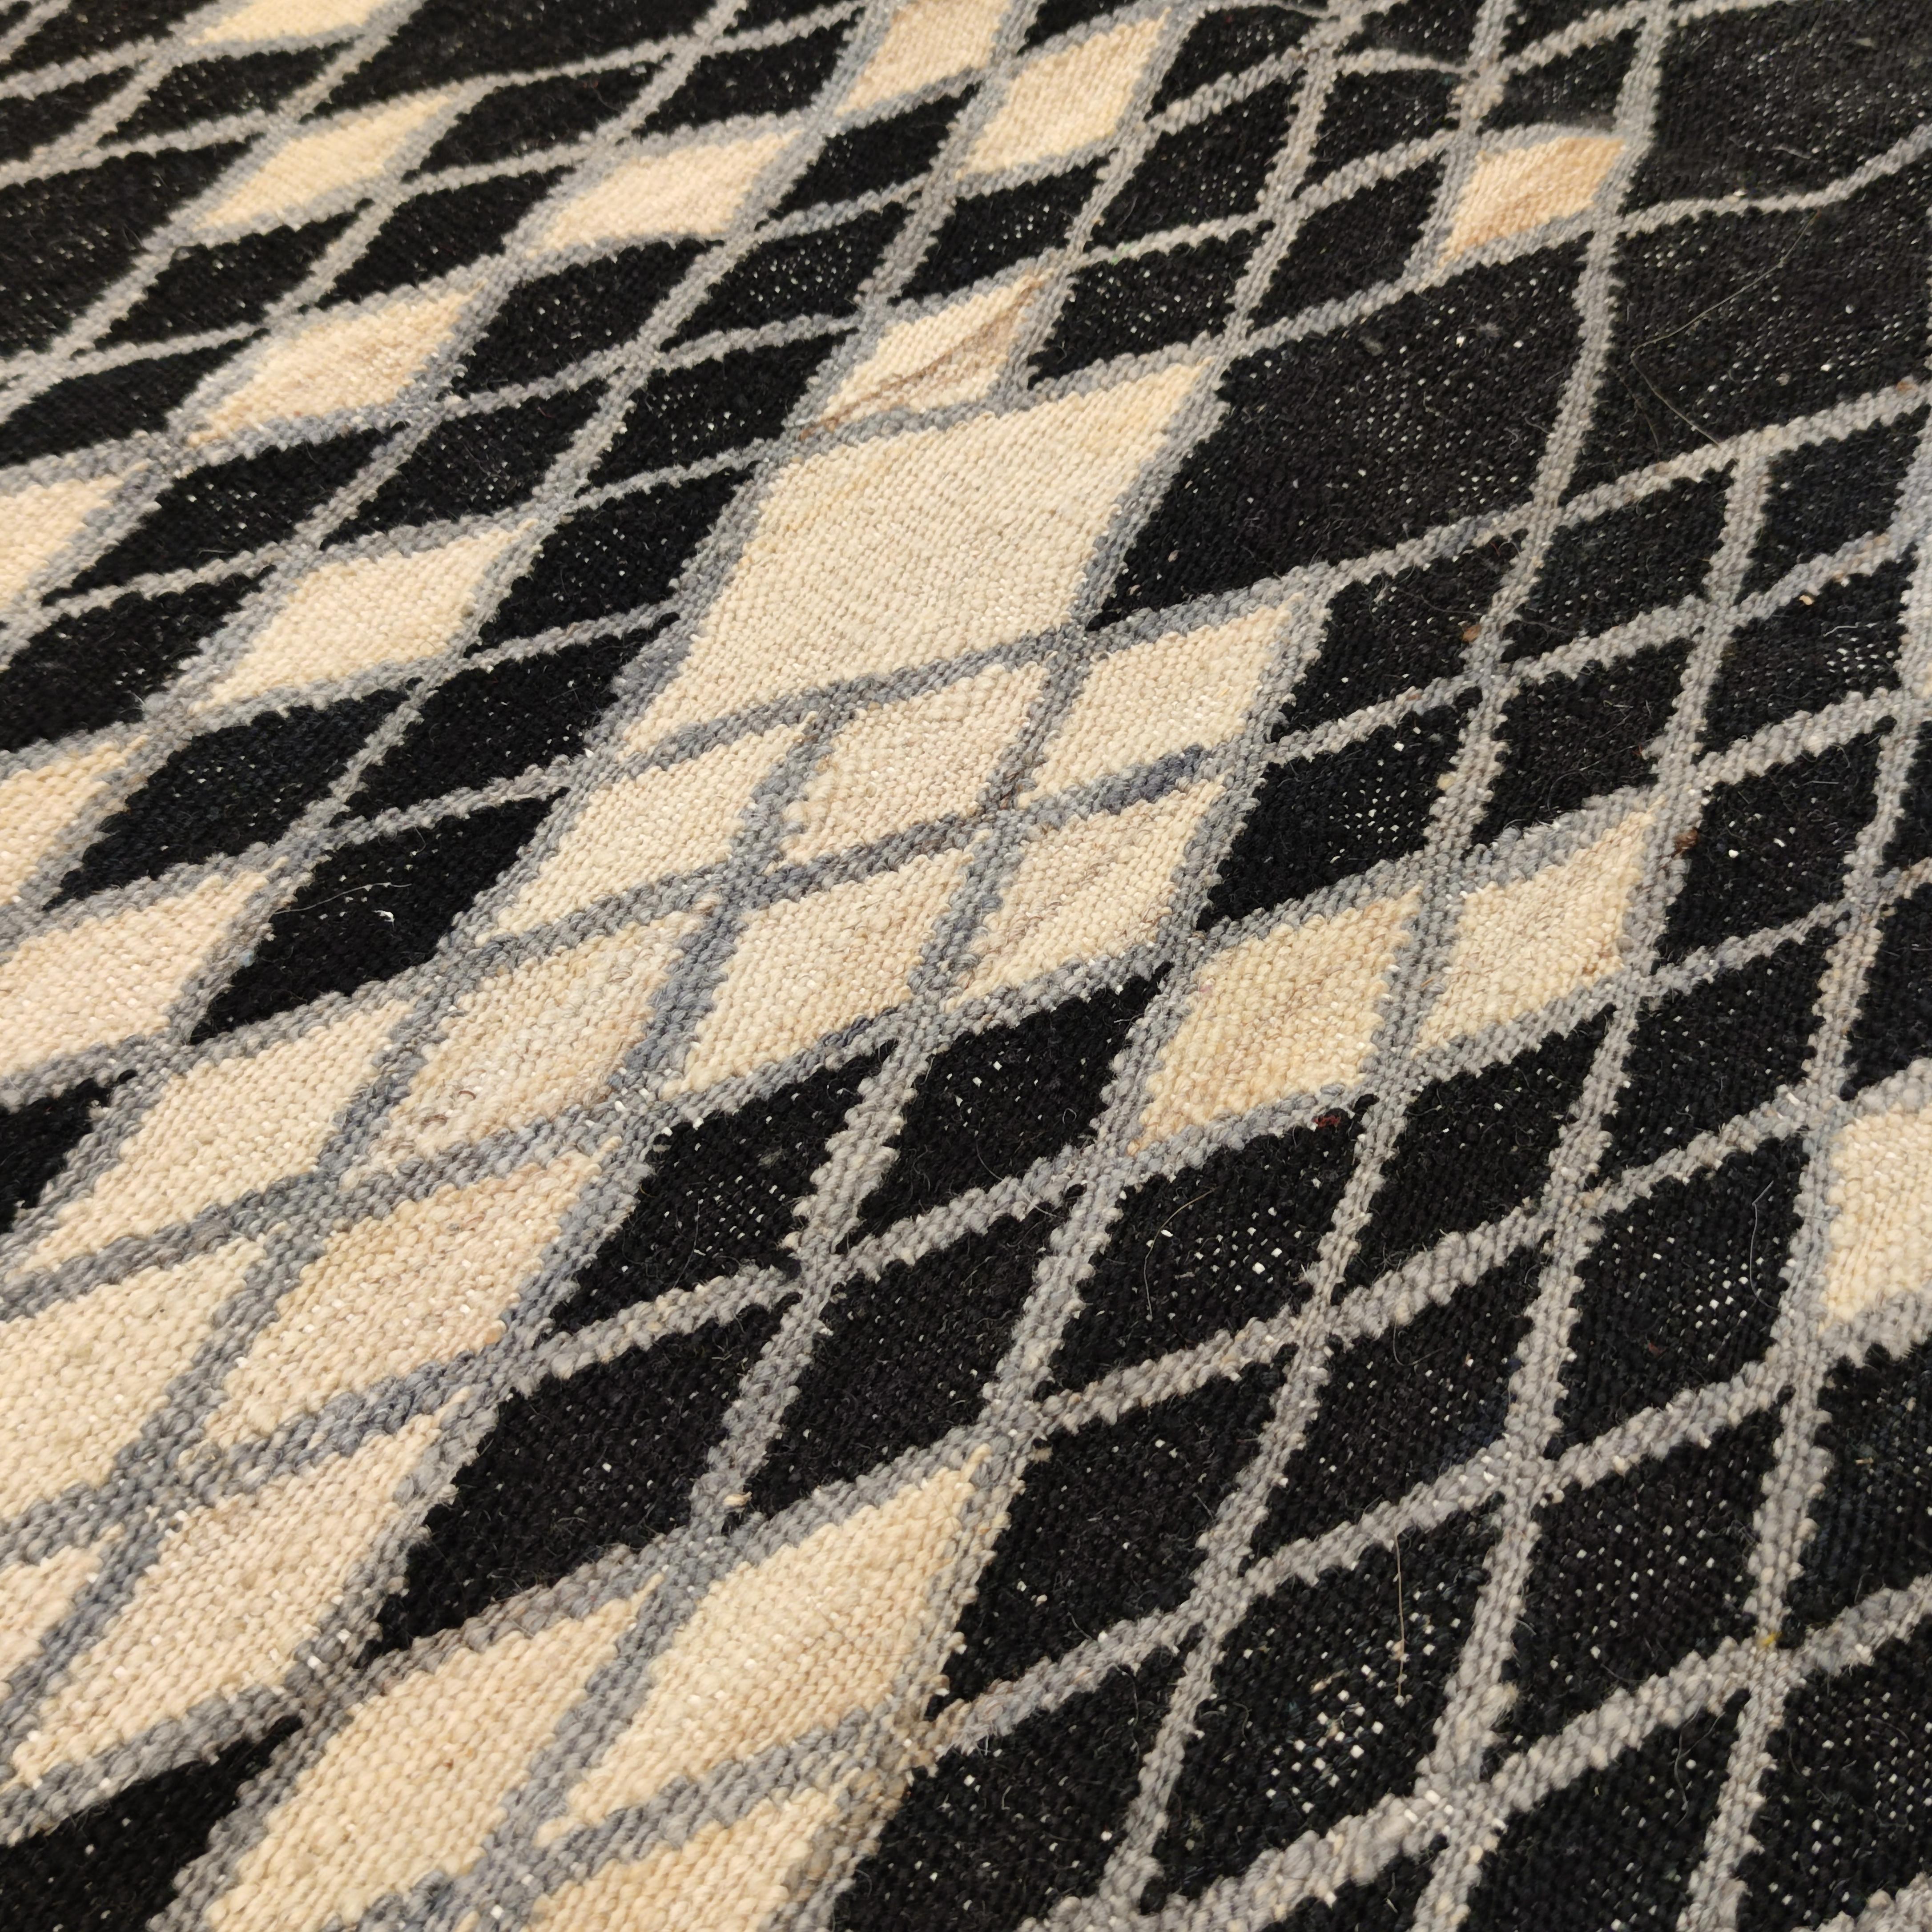 Modernist Octagonal Shaped Geometric Kilim Rug in White, Grey and Black In New Condition For Sale In Milan, IT